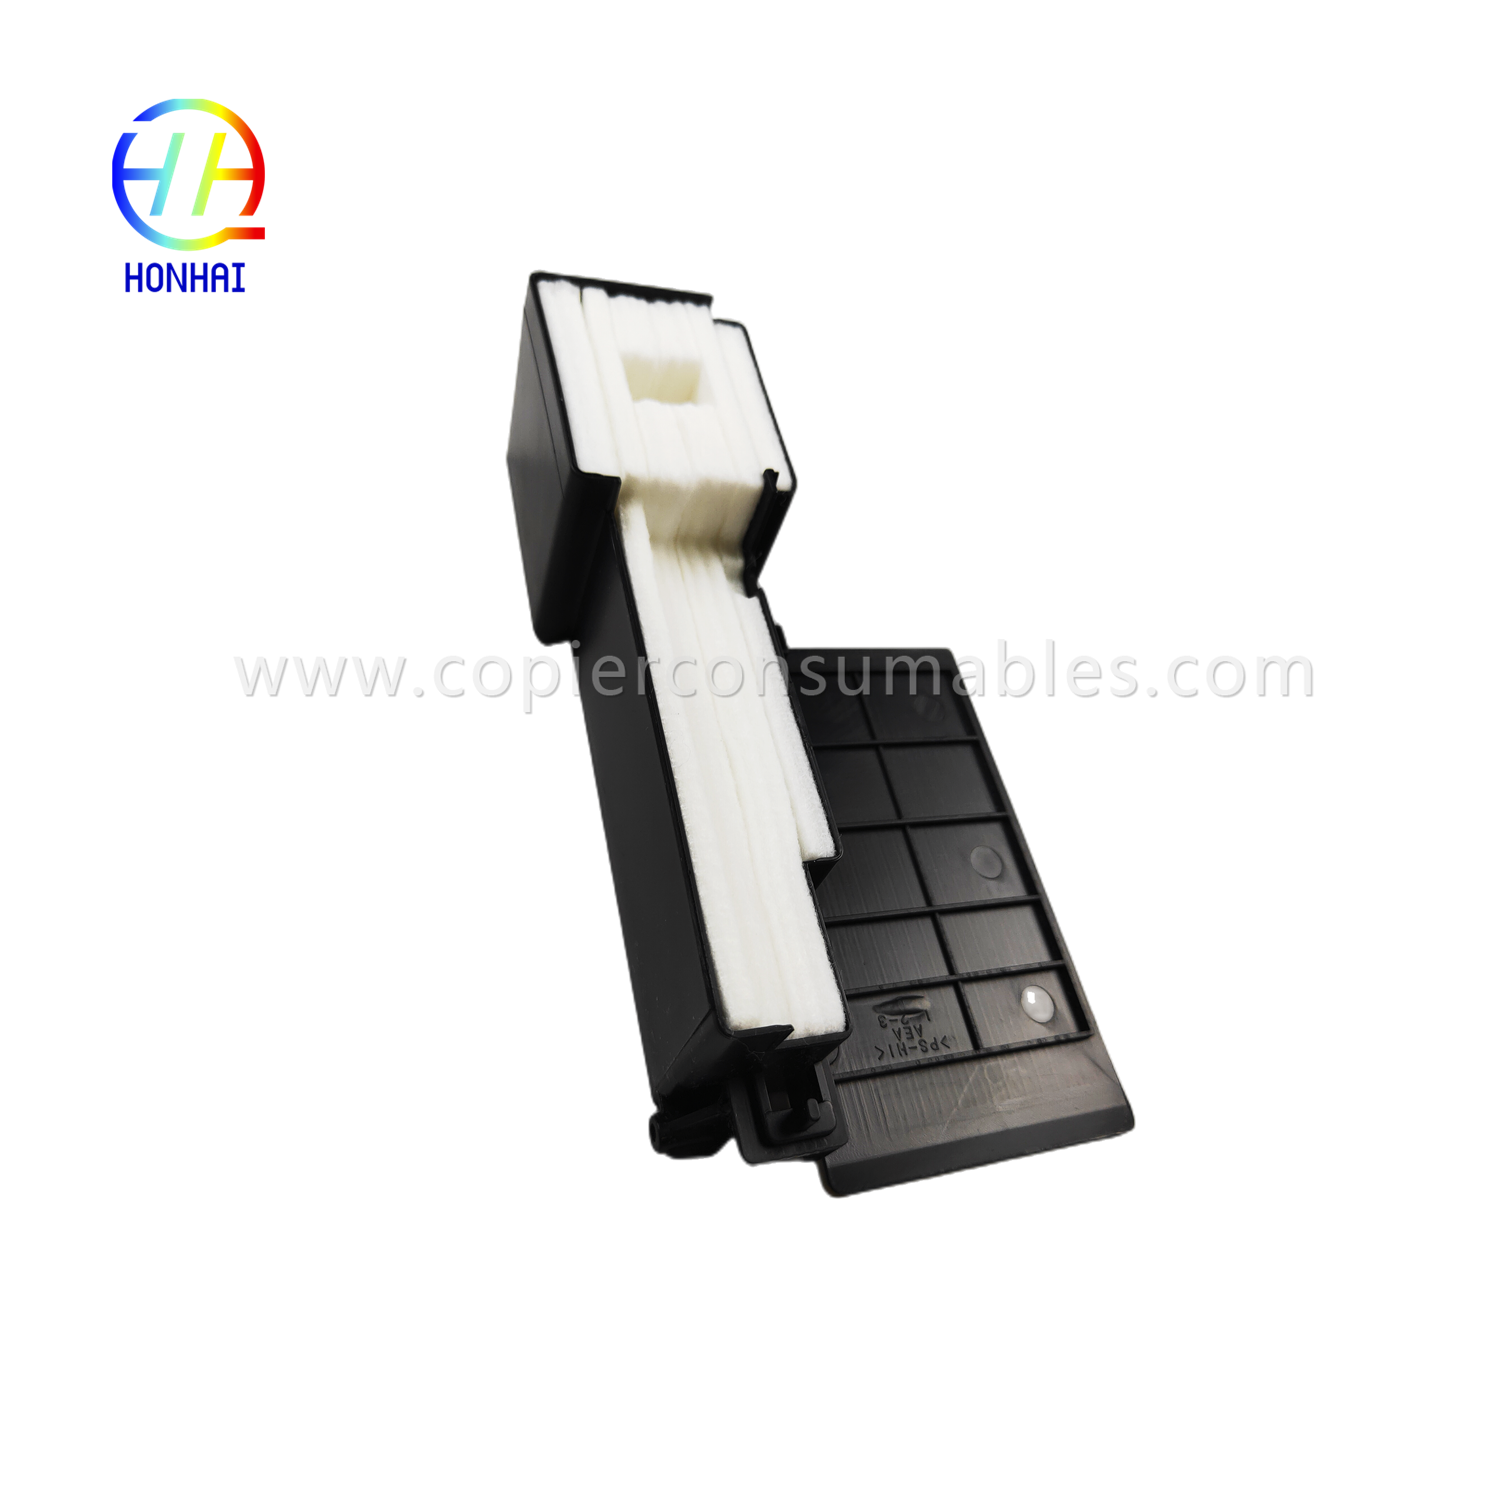 https://c585.goodao.net/waste-inkt-pad-pack-forl220-l360-l380-printer-product/